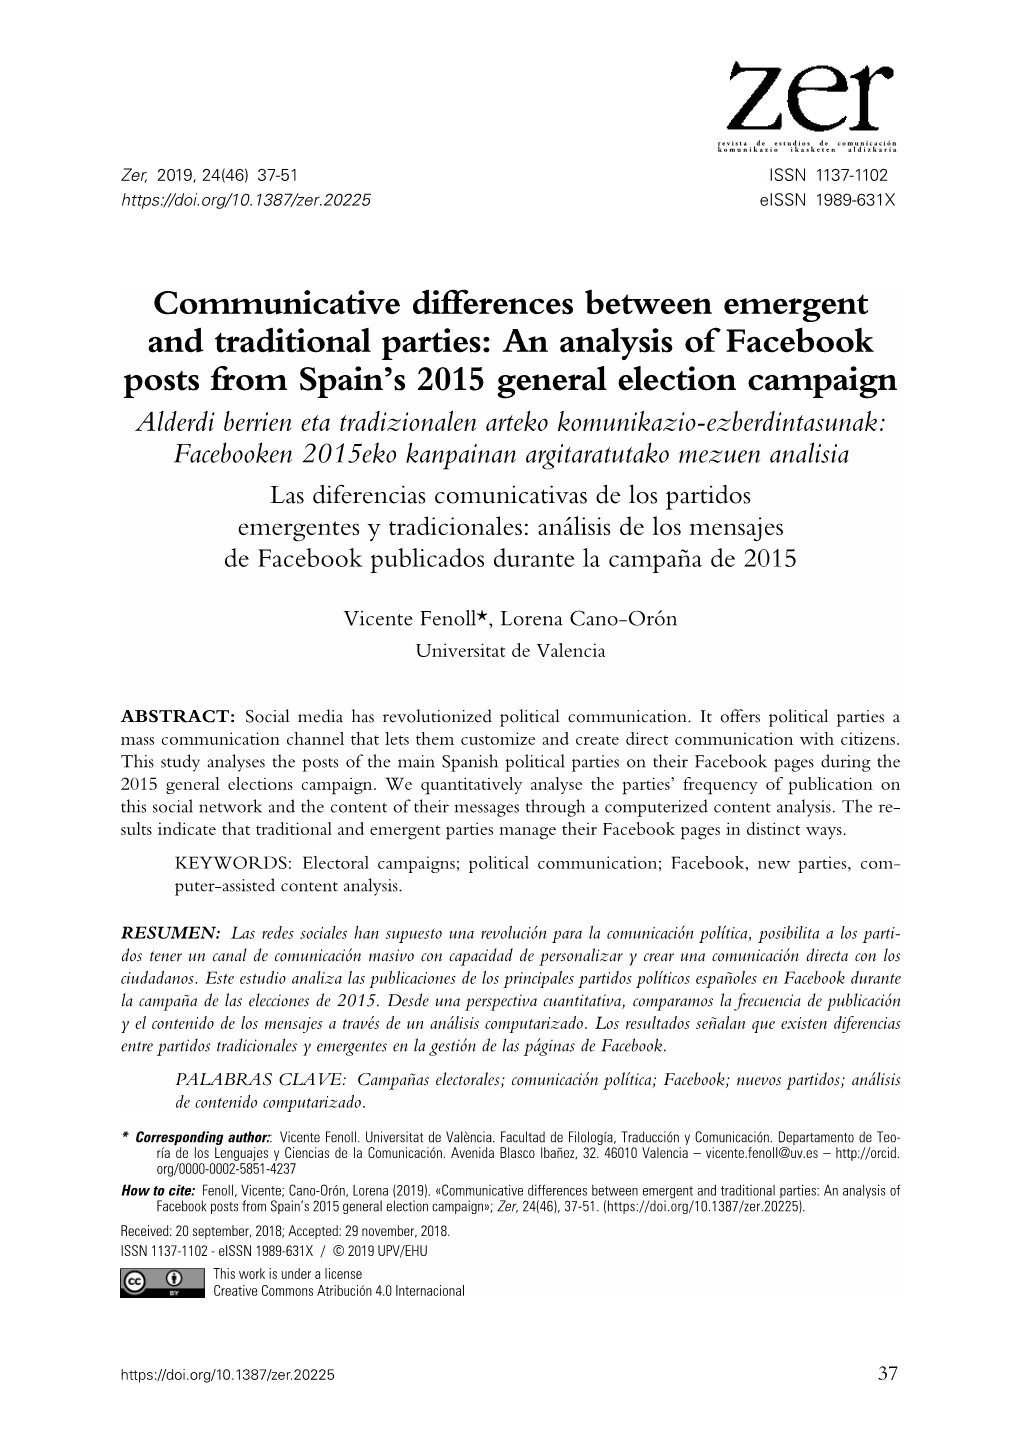 Communicative Differences Between Emergent and Traditional Parties: an Analysis of Facebook Posts from Spain's 2015 General El